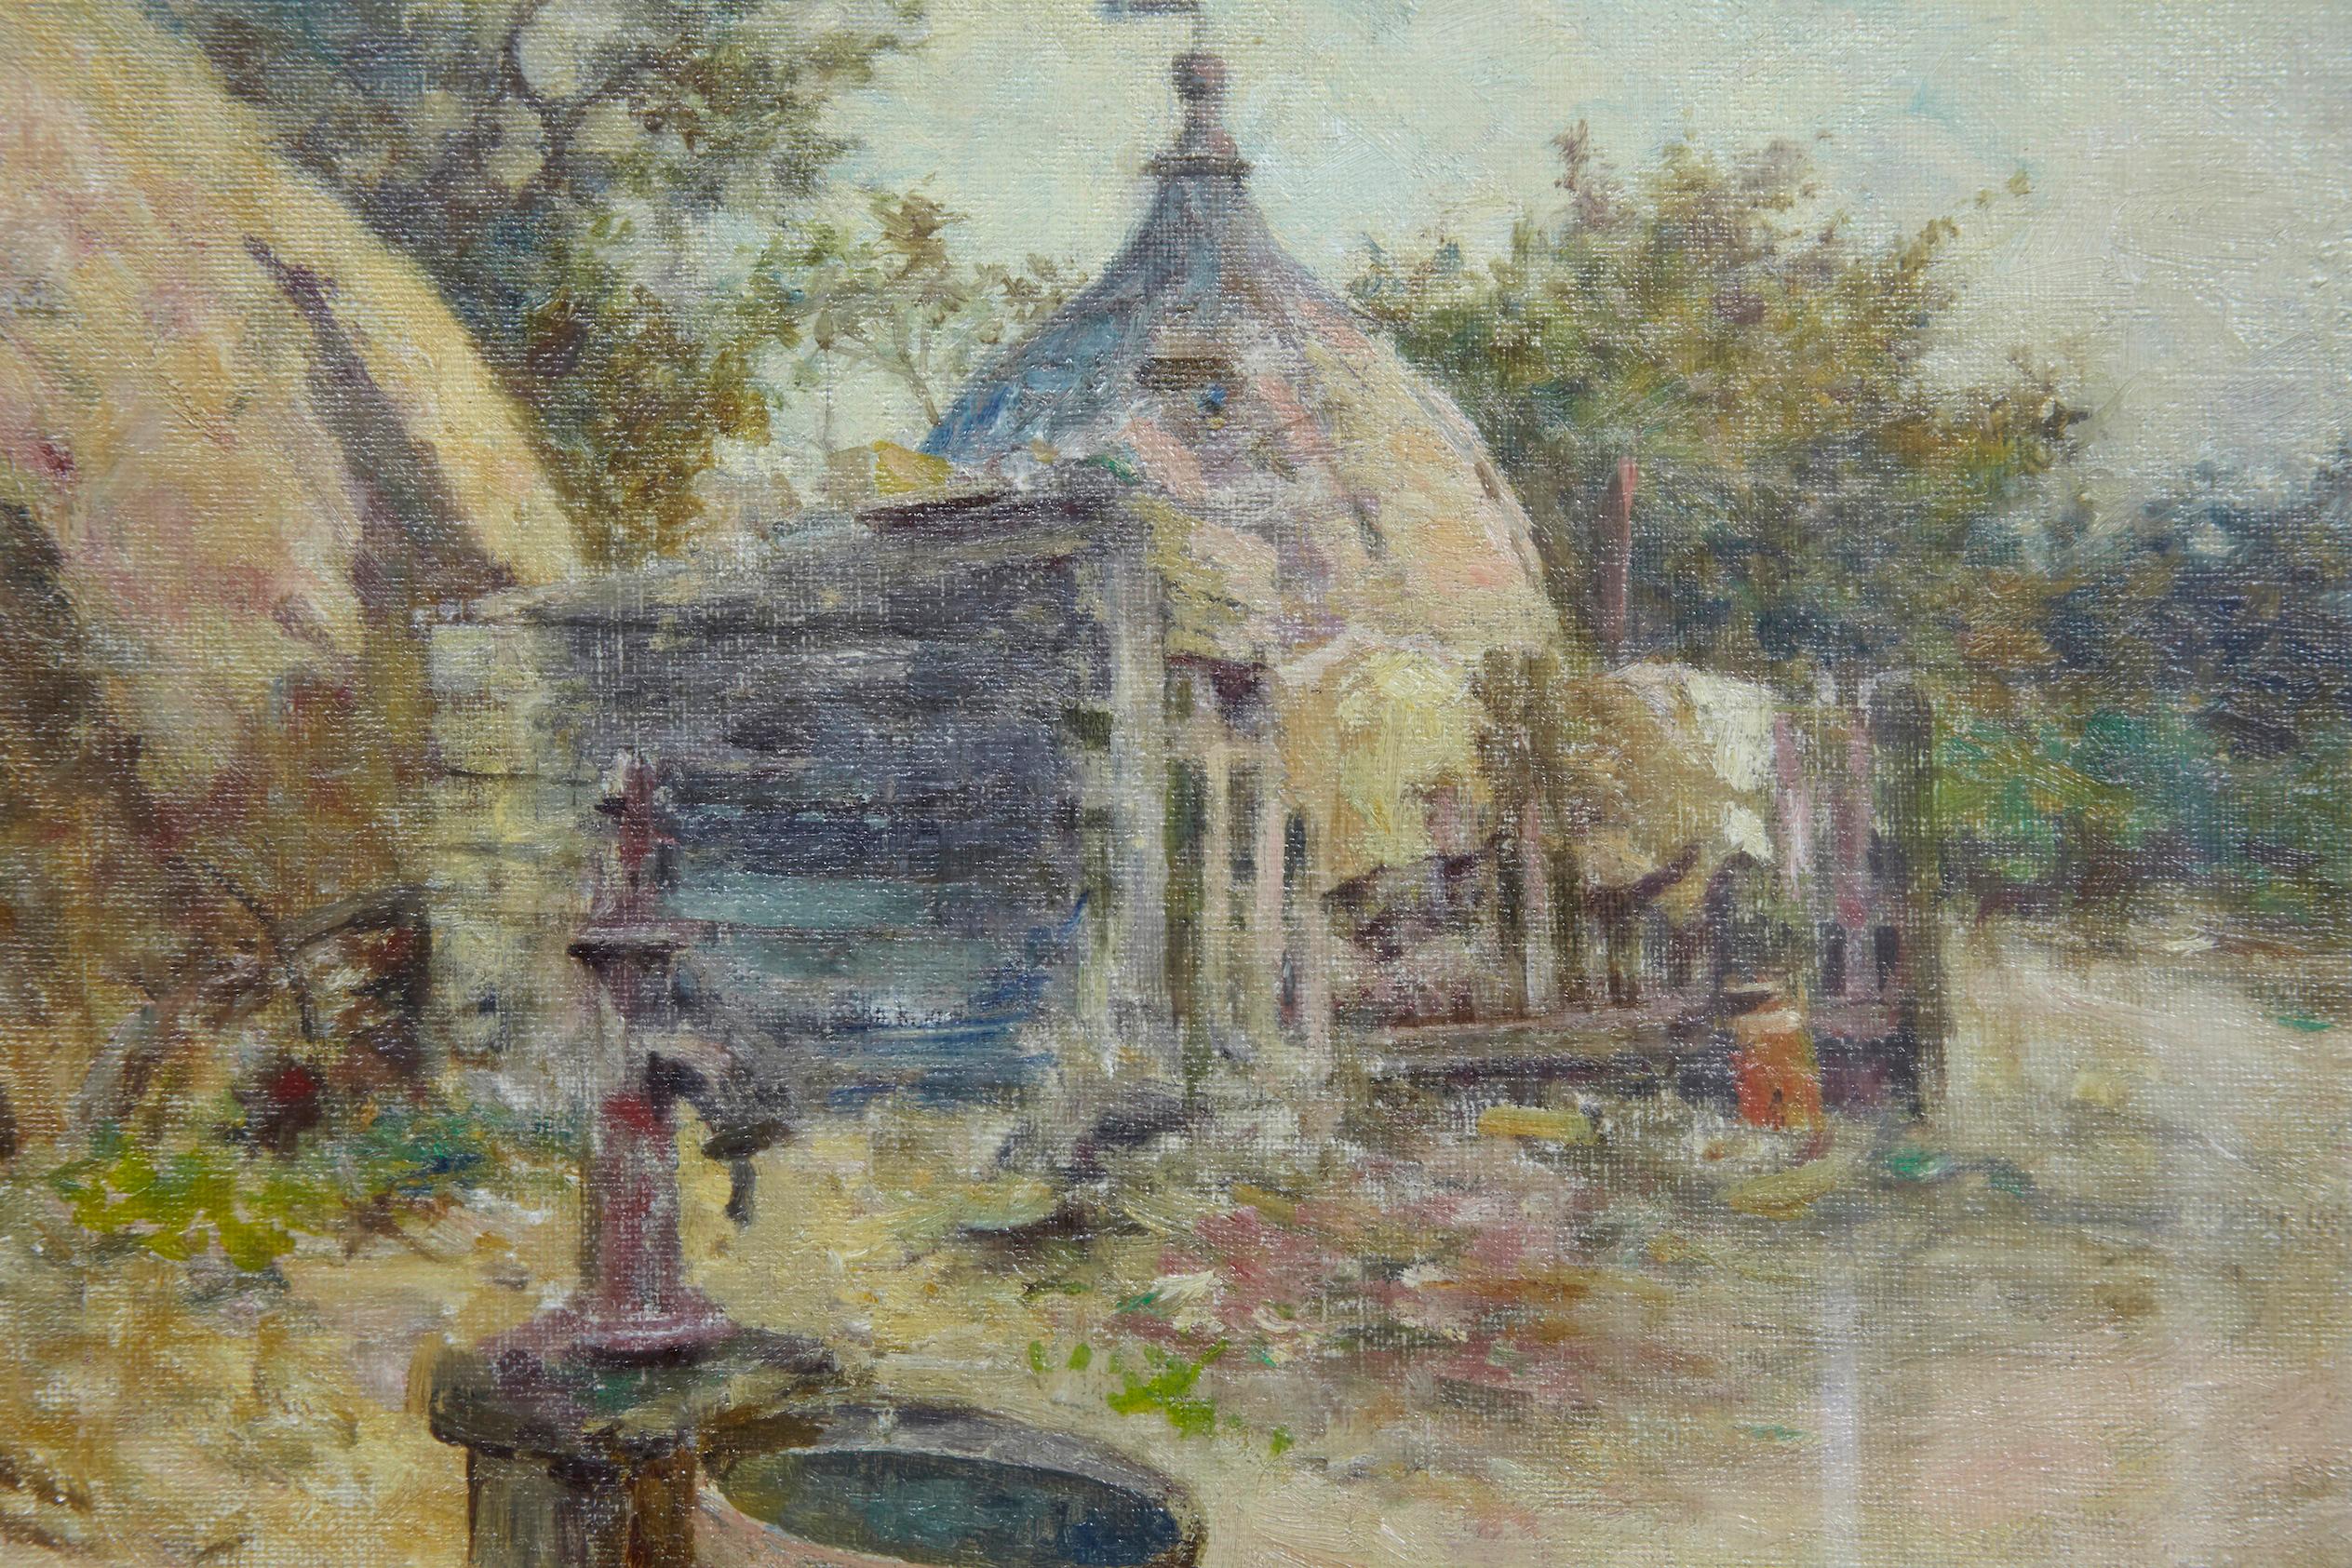 English Early 20th Century Oil Painting Village Scene by Robert McGregor